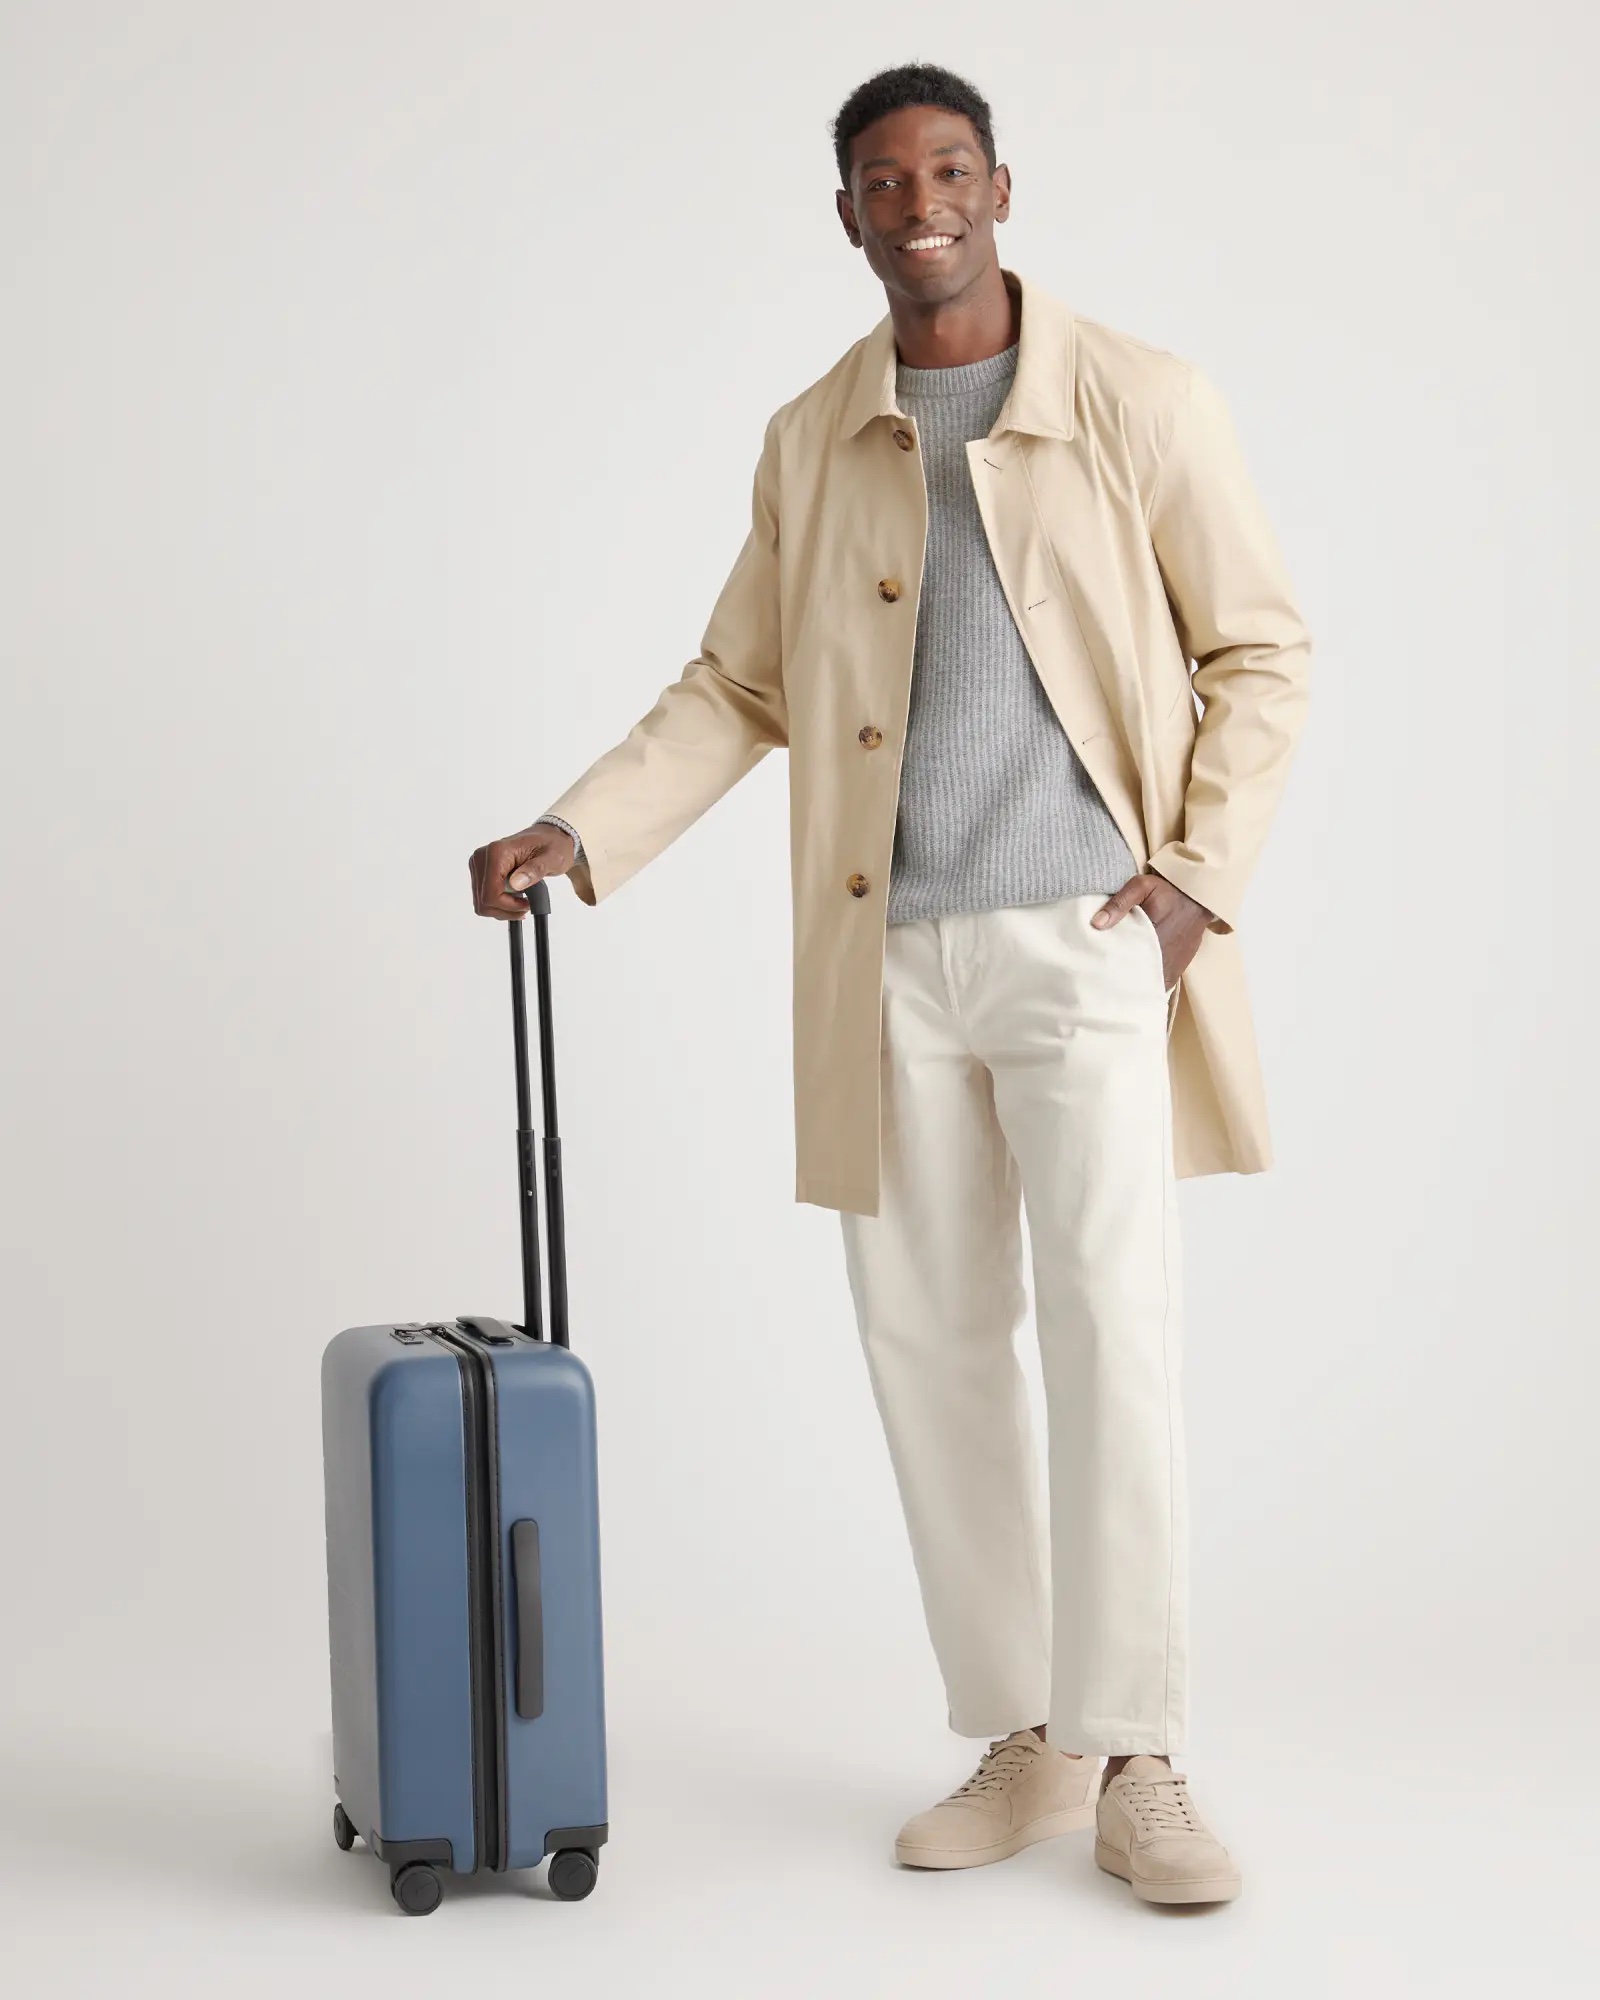 A man in a trench coat holds the hand le of a blue carry on case.